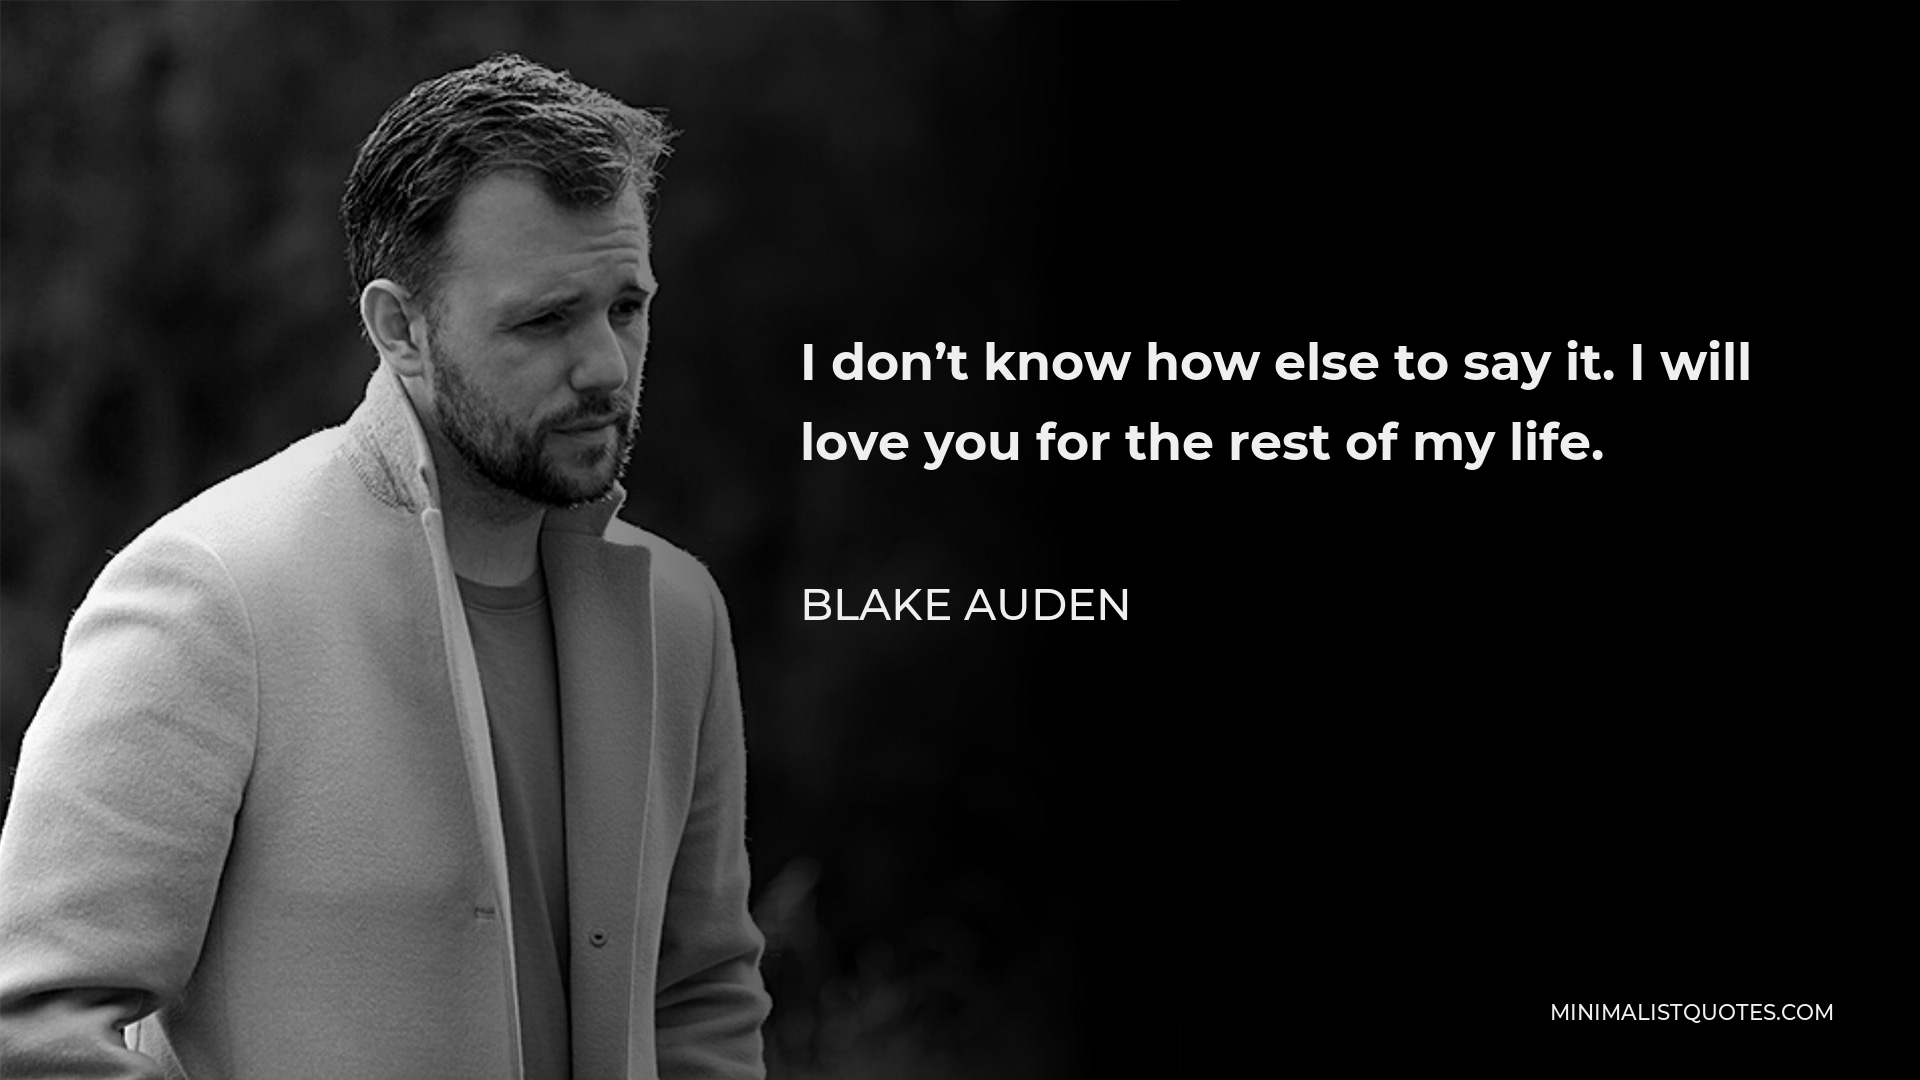 Blake Auden Quote - I don’t know how else to say it. I will love you for the rest of my life.